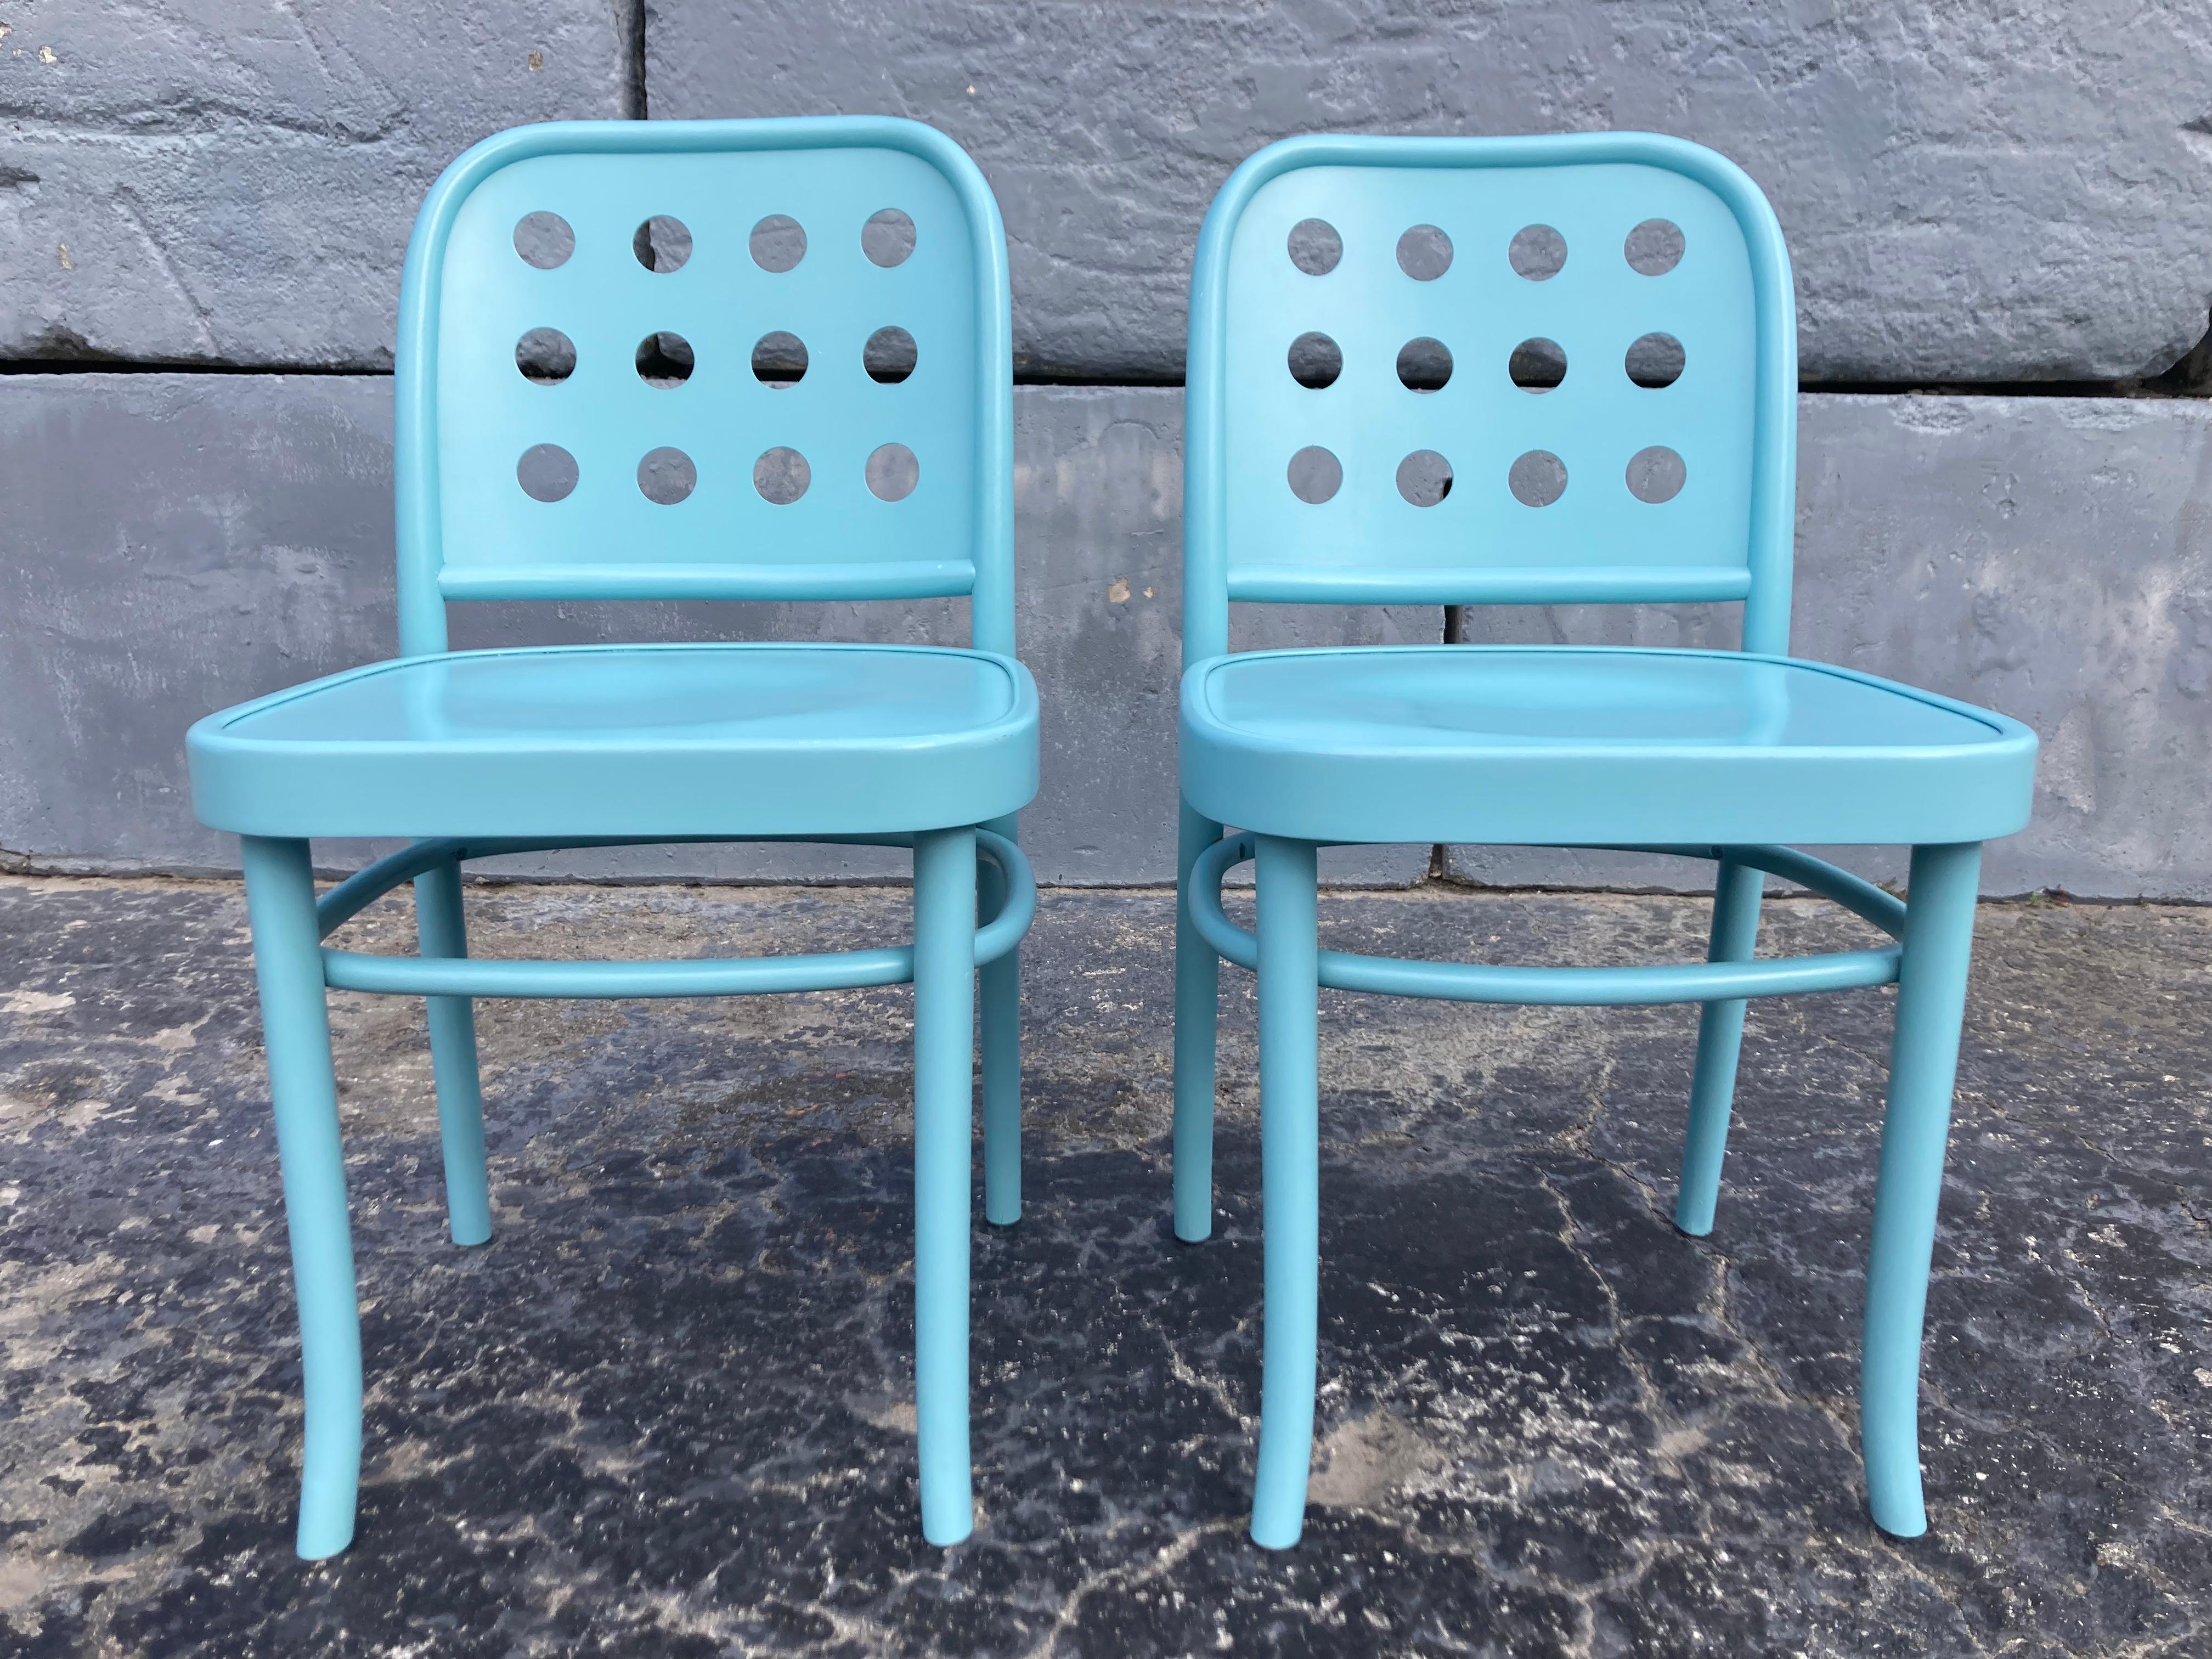 Pair of Bentwood Chairs by Josef Hoffmann & Oswald Haerdtl. Aqua color paint finish. Made in Poland. Retailed through DWR.